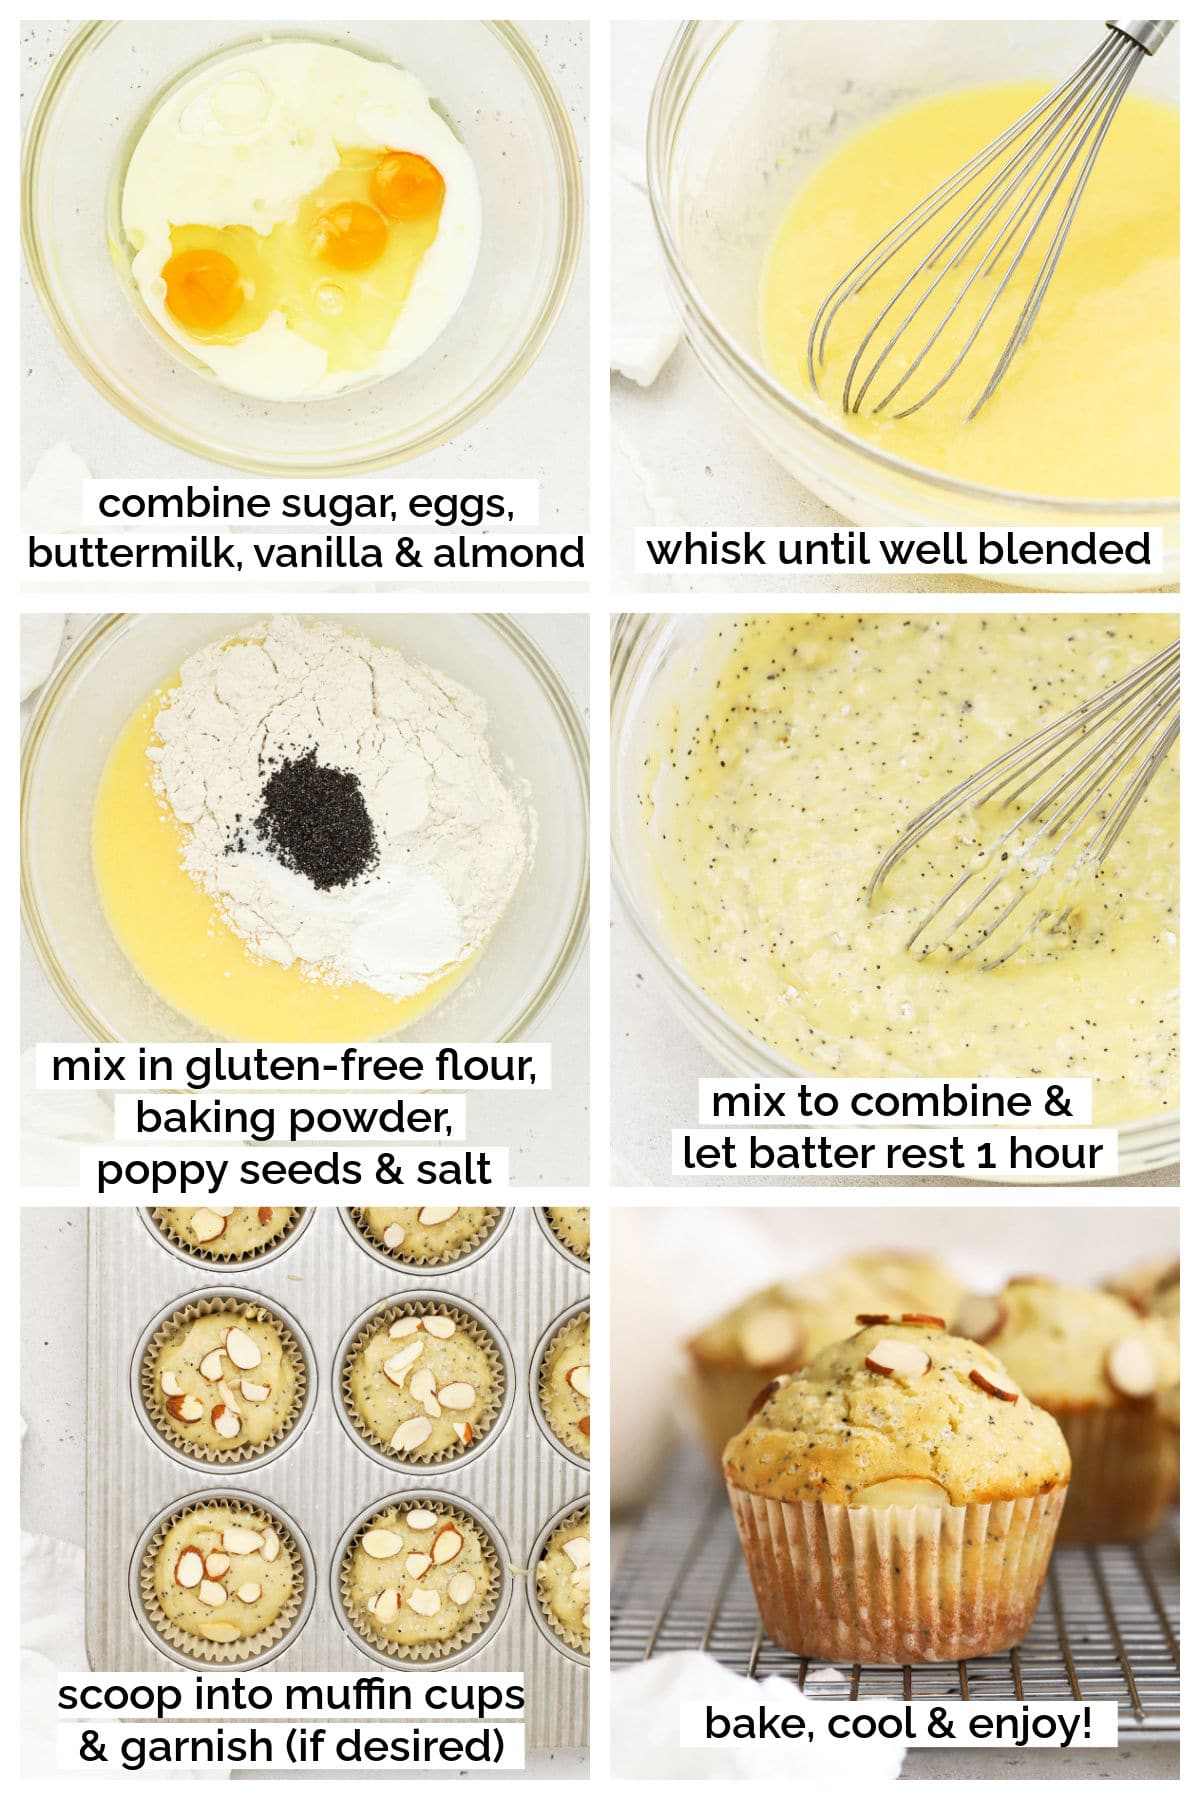 making gluten-free almond poppy seed muffins step by step